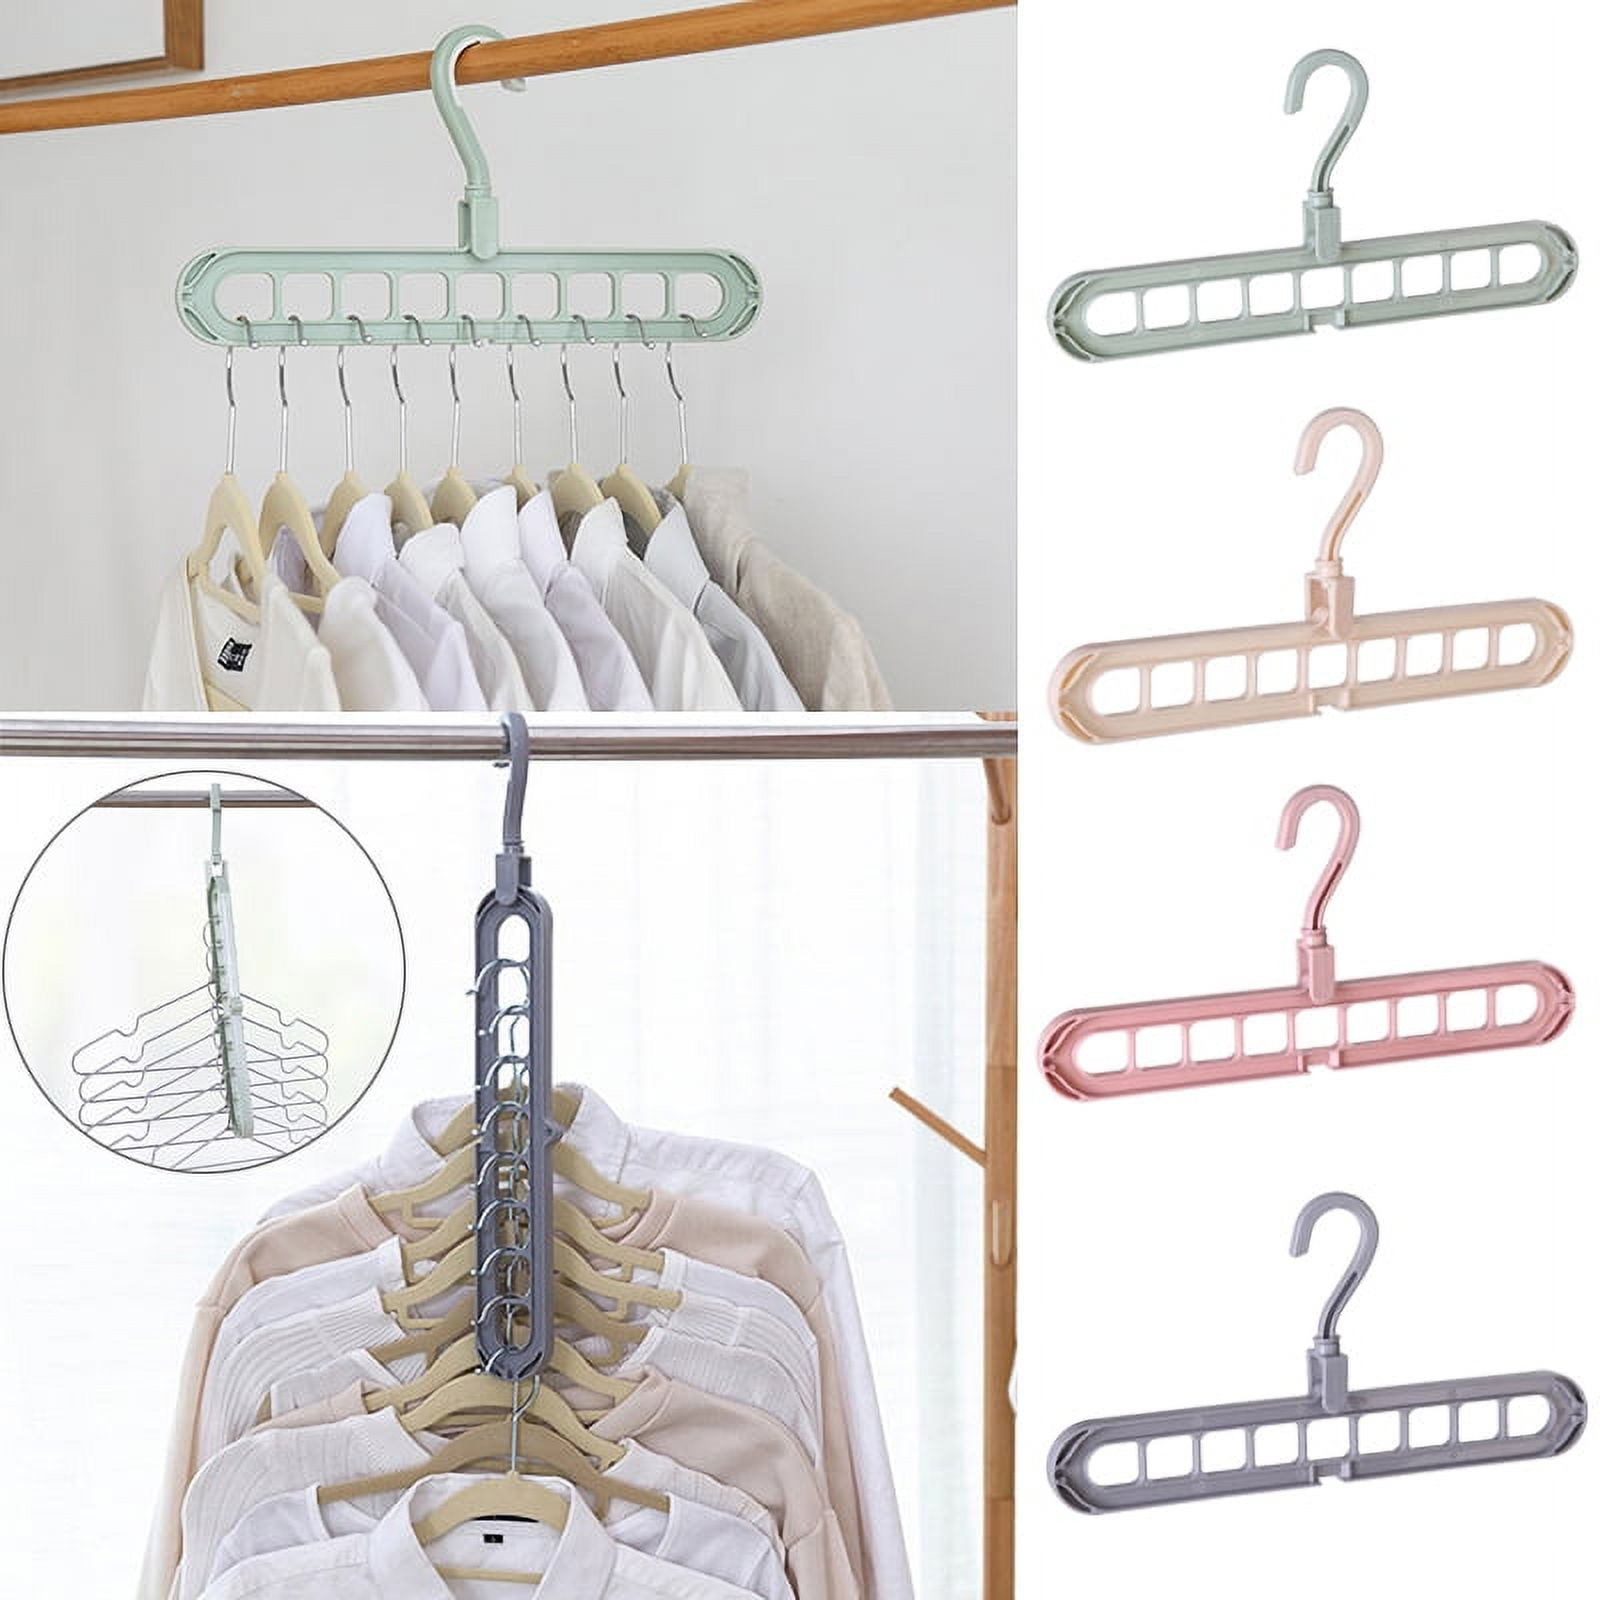 FIFATA Space Saving Cascading Clothes Hangers, 4 Pack, Polypropylene, Heavy  Duty, White, Pink, Light Gray, Green